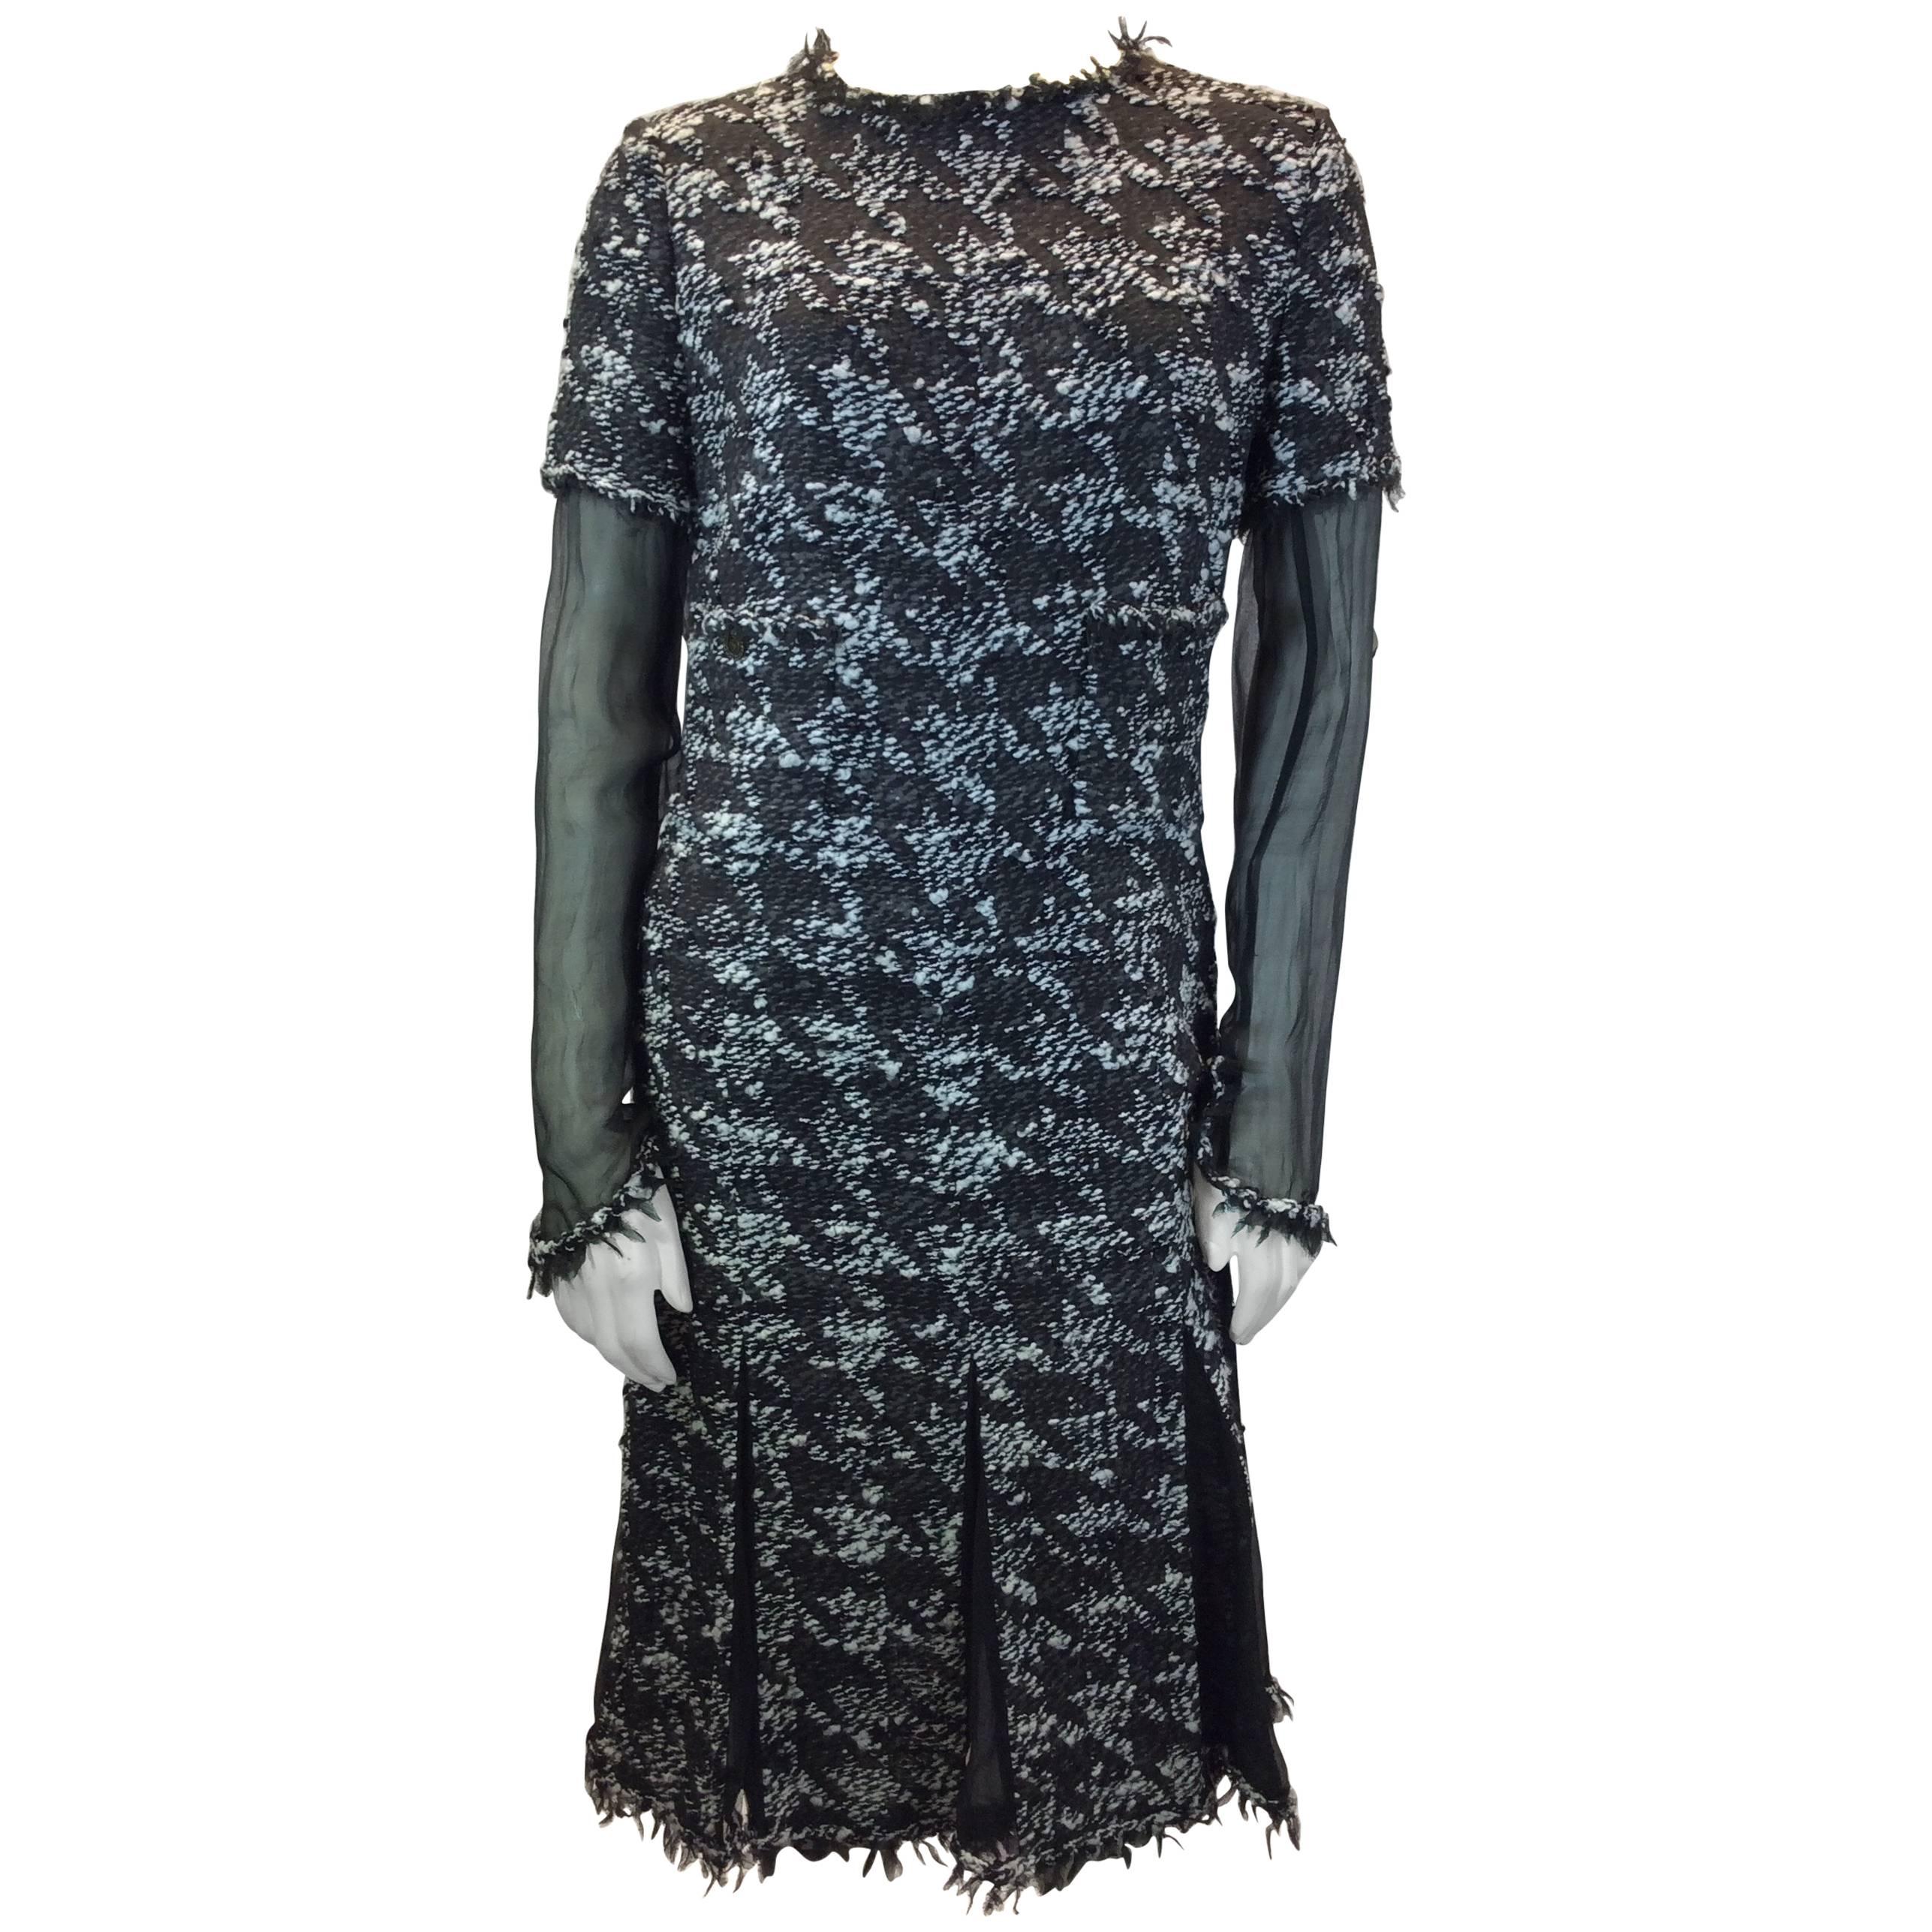 Chanel Black and White Houndstooth Tweed Dress with Sheer Sleeves For Sale